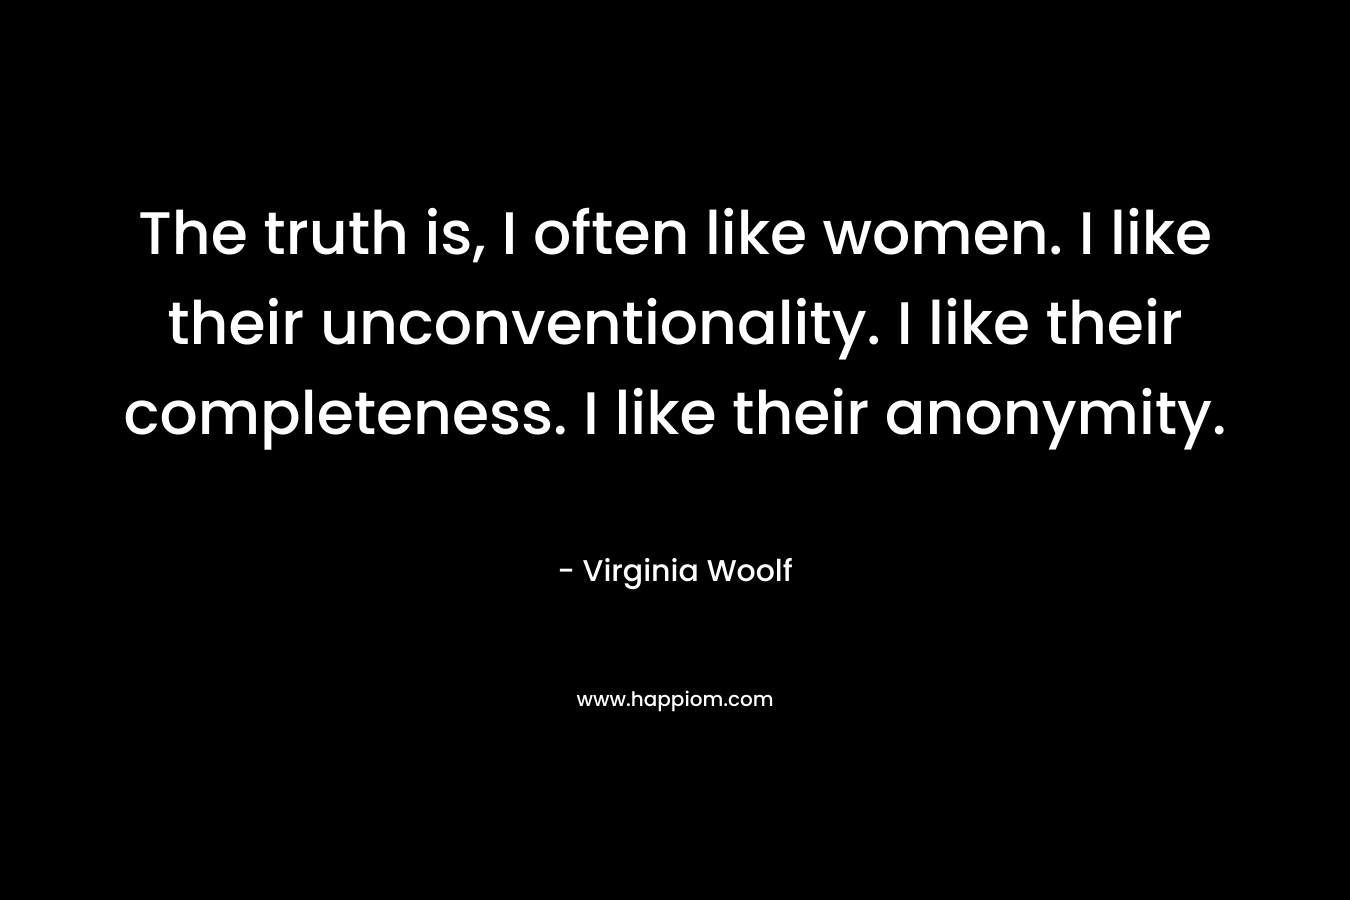 The truth is, I often like women. I like their unconventionality. I like their completeness. I like their anonymity. 